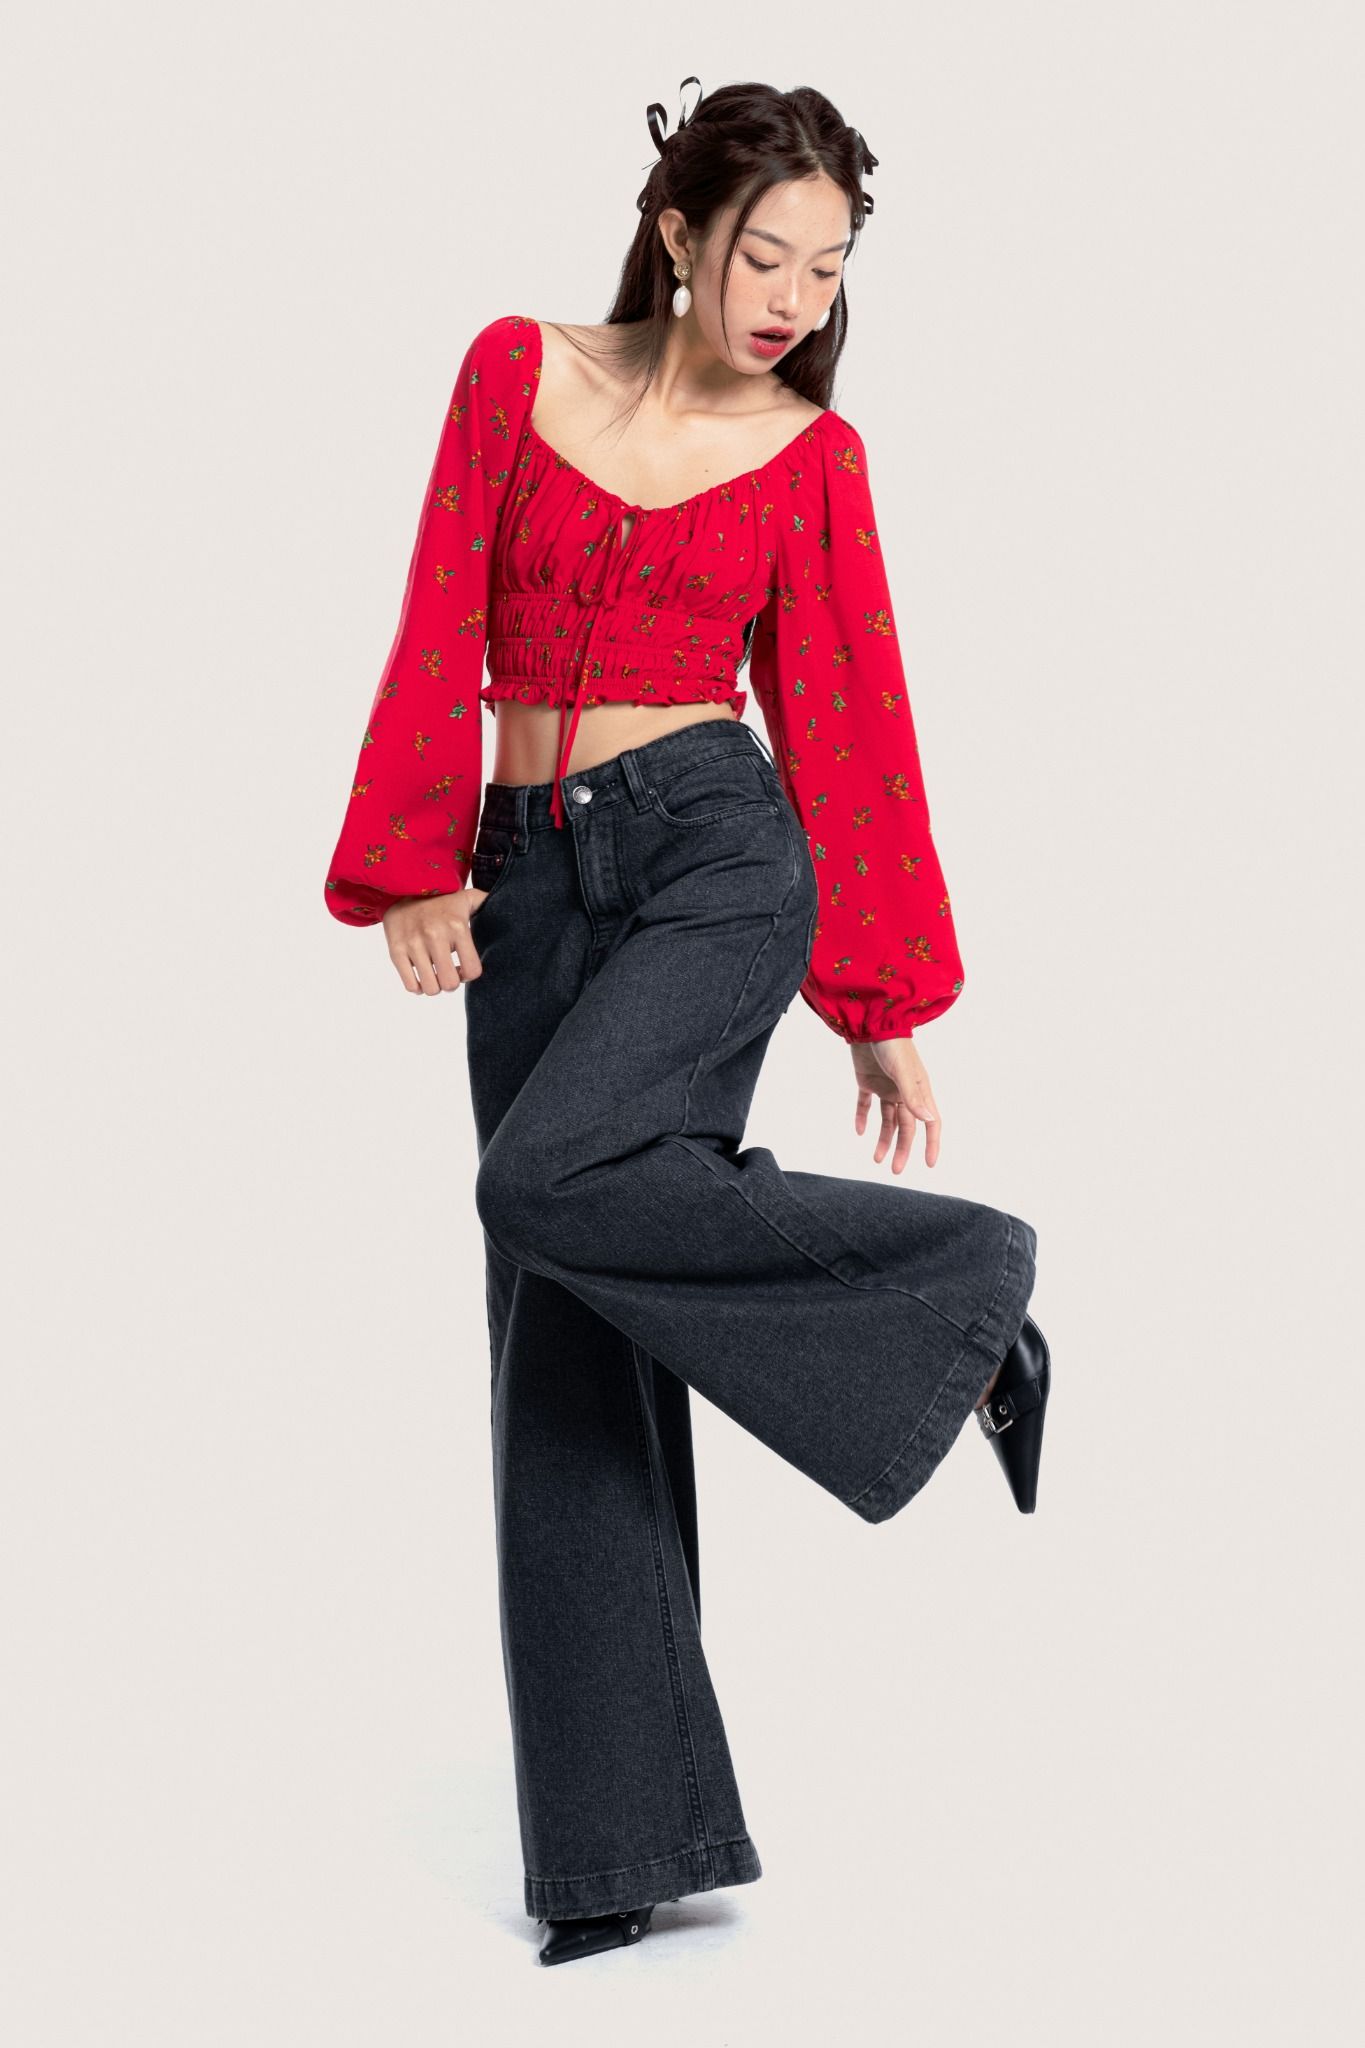  Bohemian Red Floral Long Puff Sleeves Top 